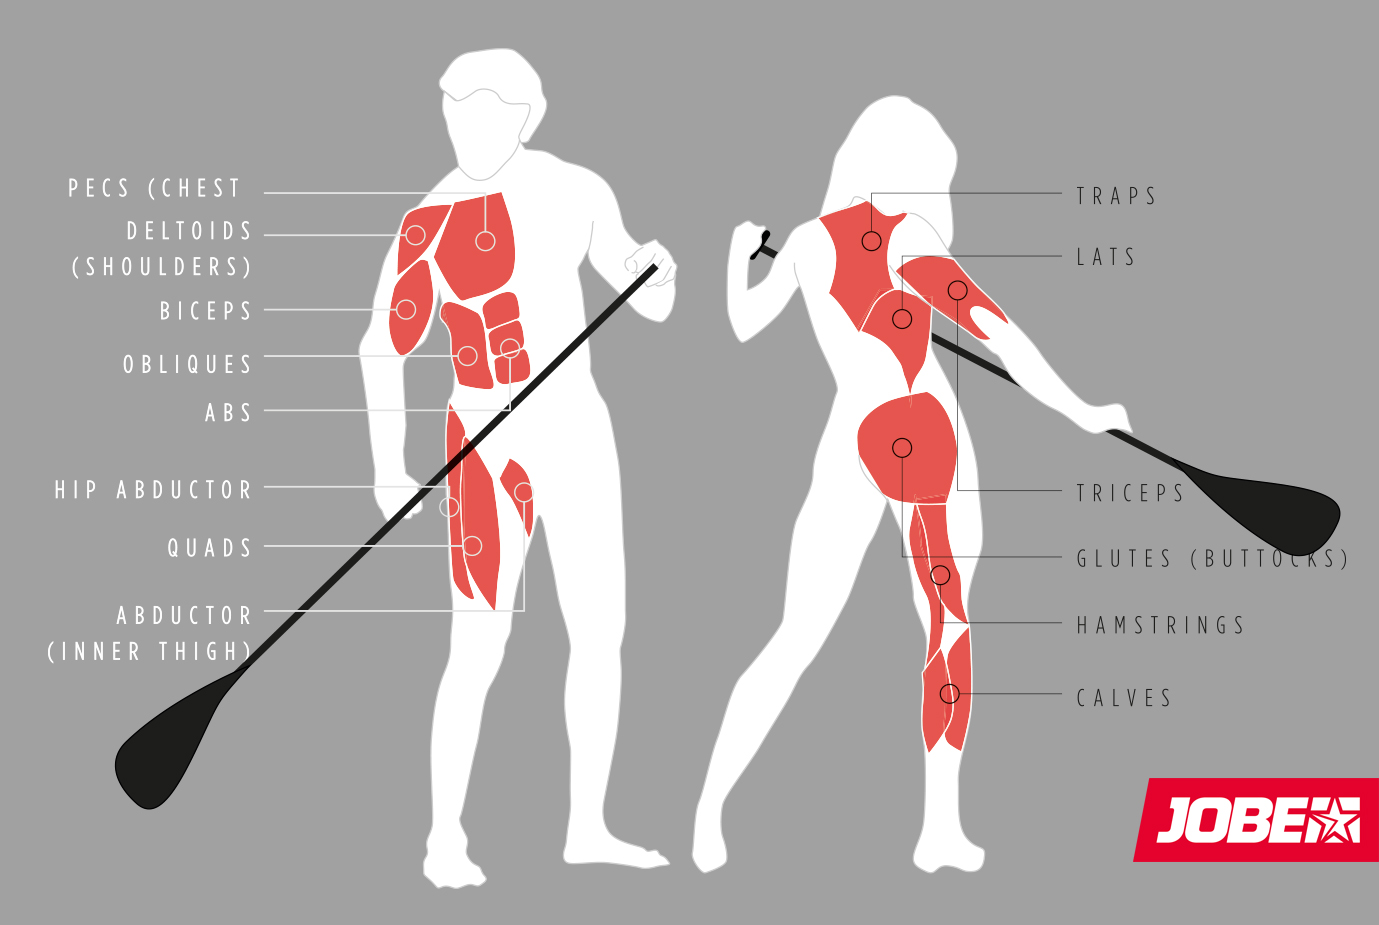 The physical benefits of SUP